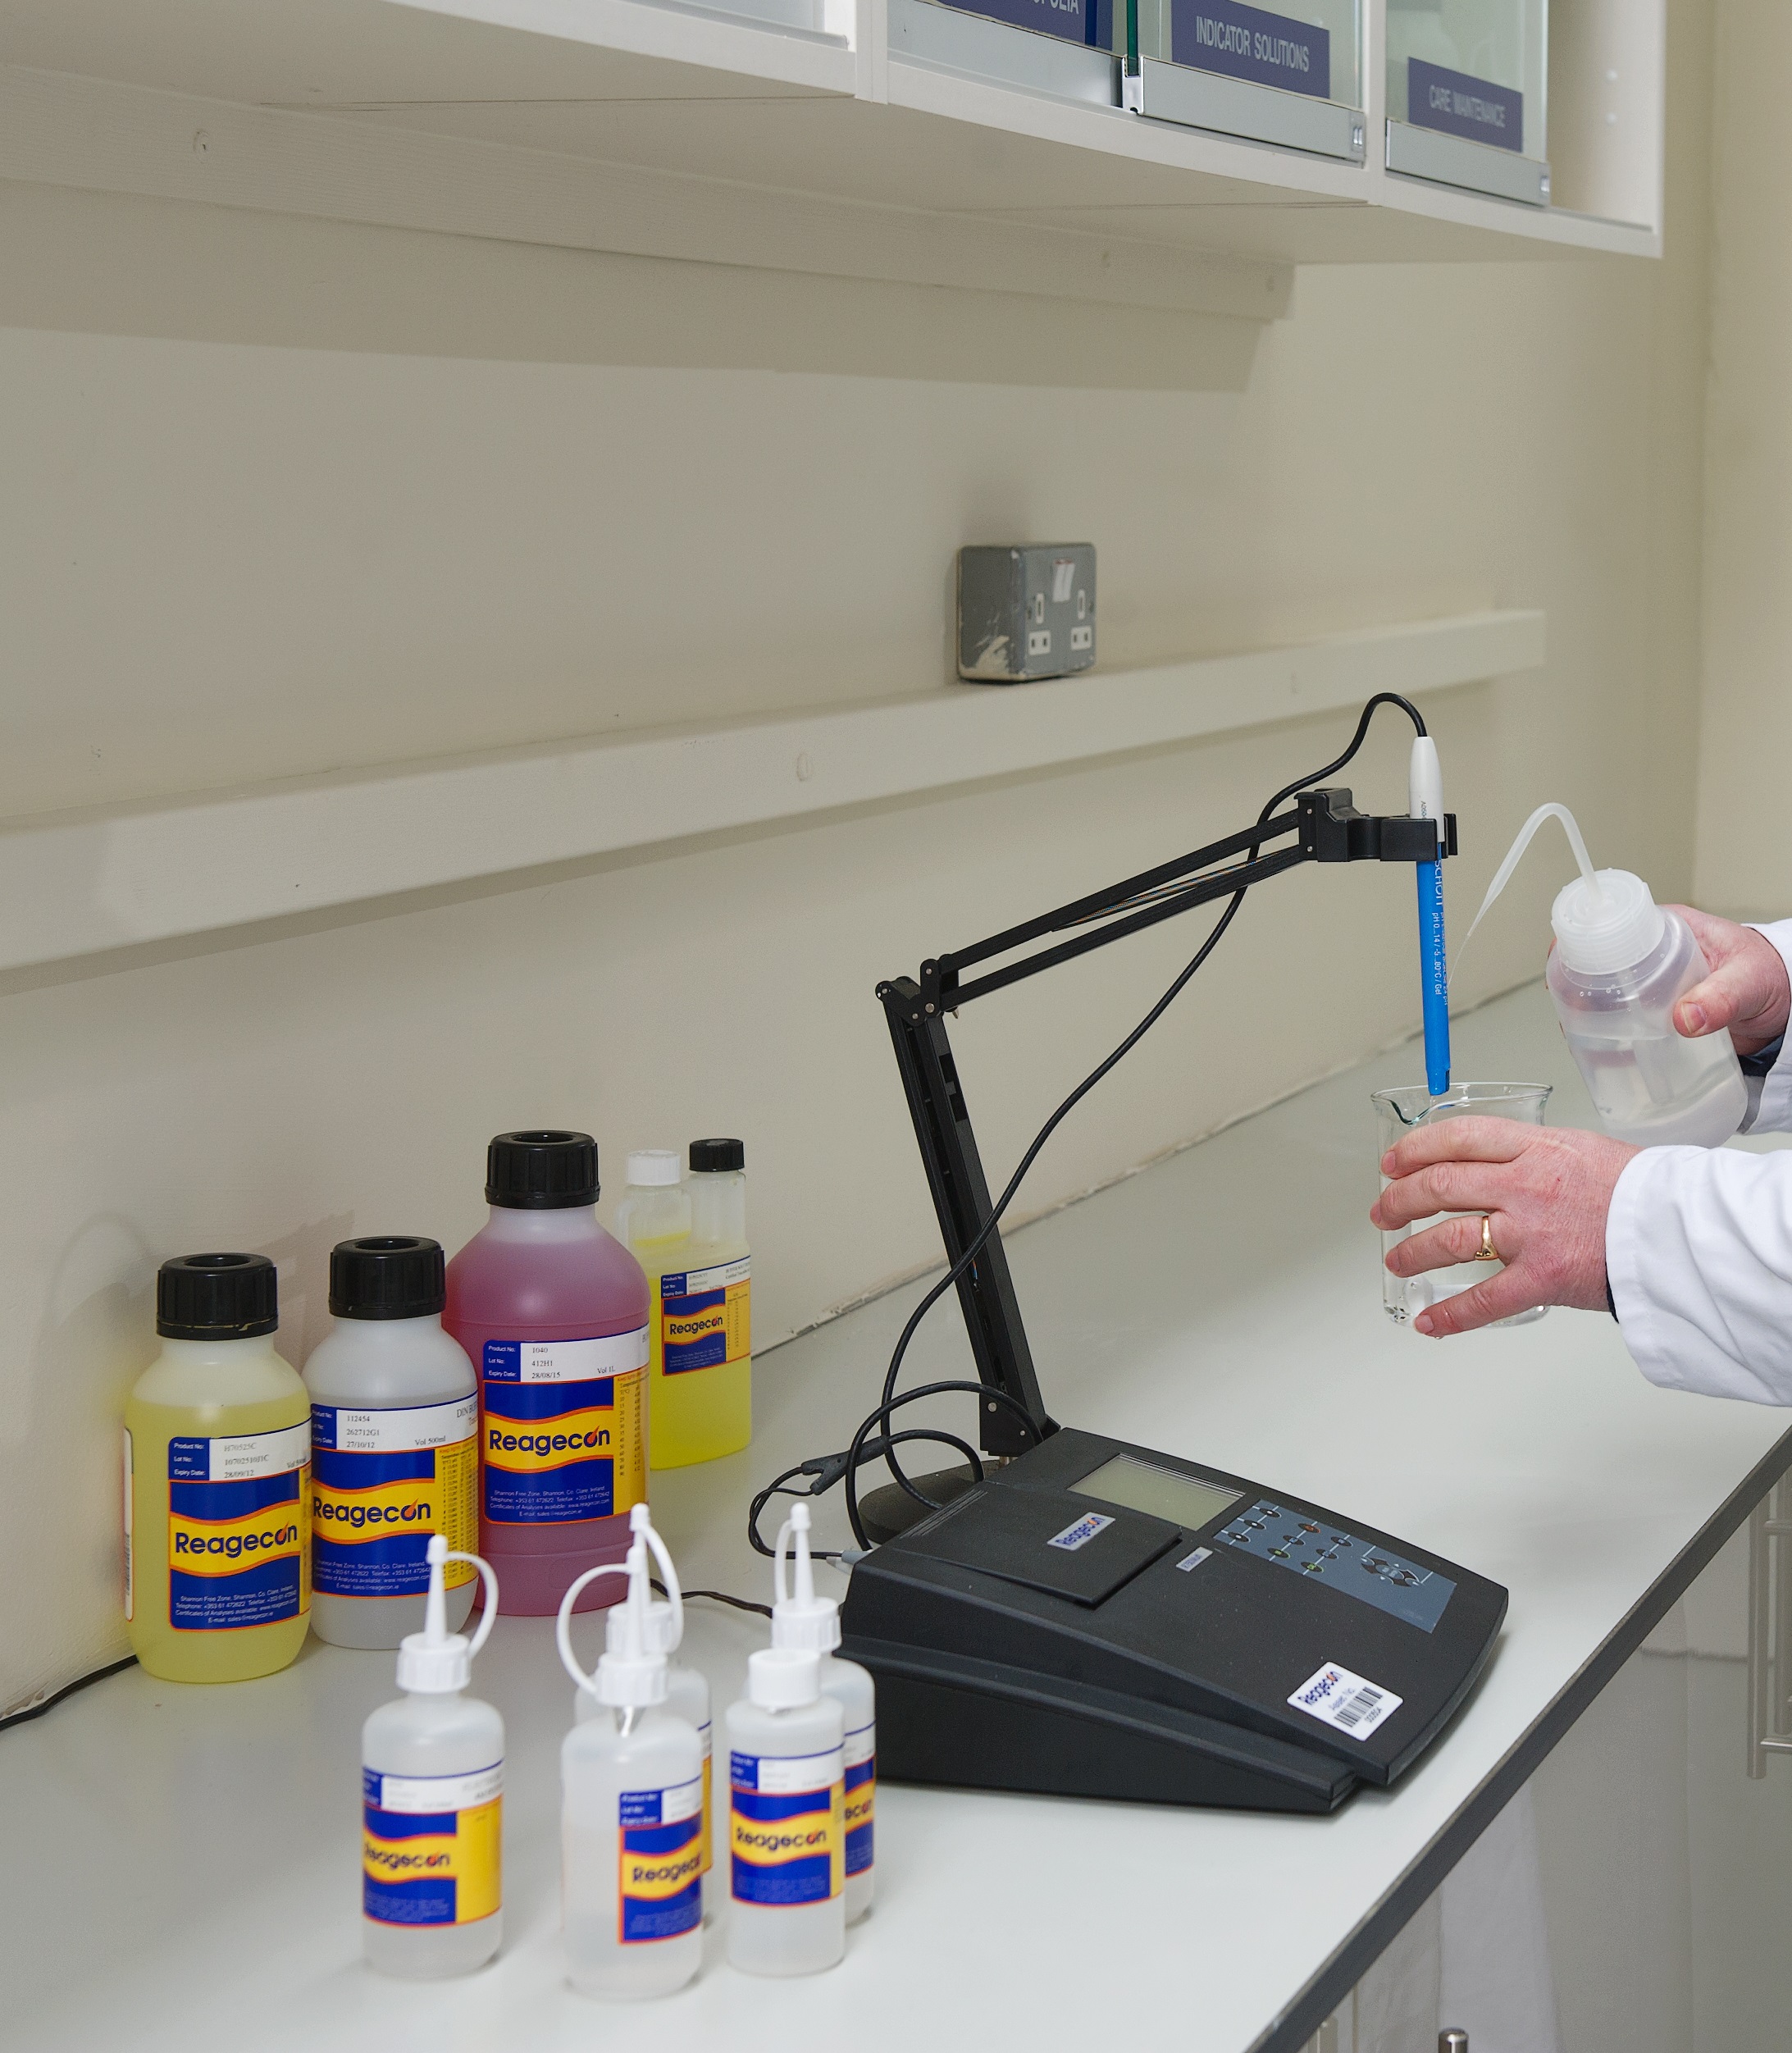 10 Steps for Measuring pH Accurately and Consistently